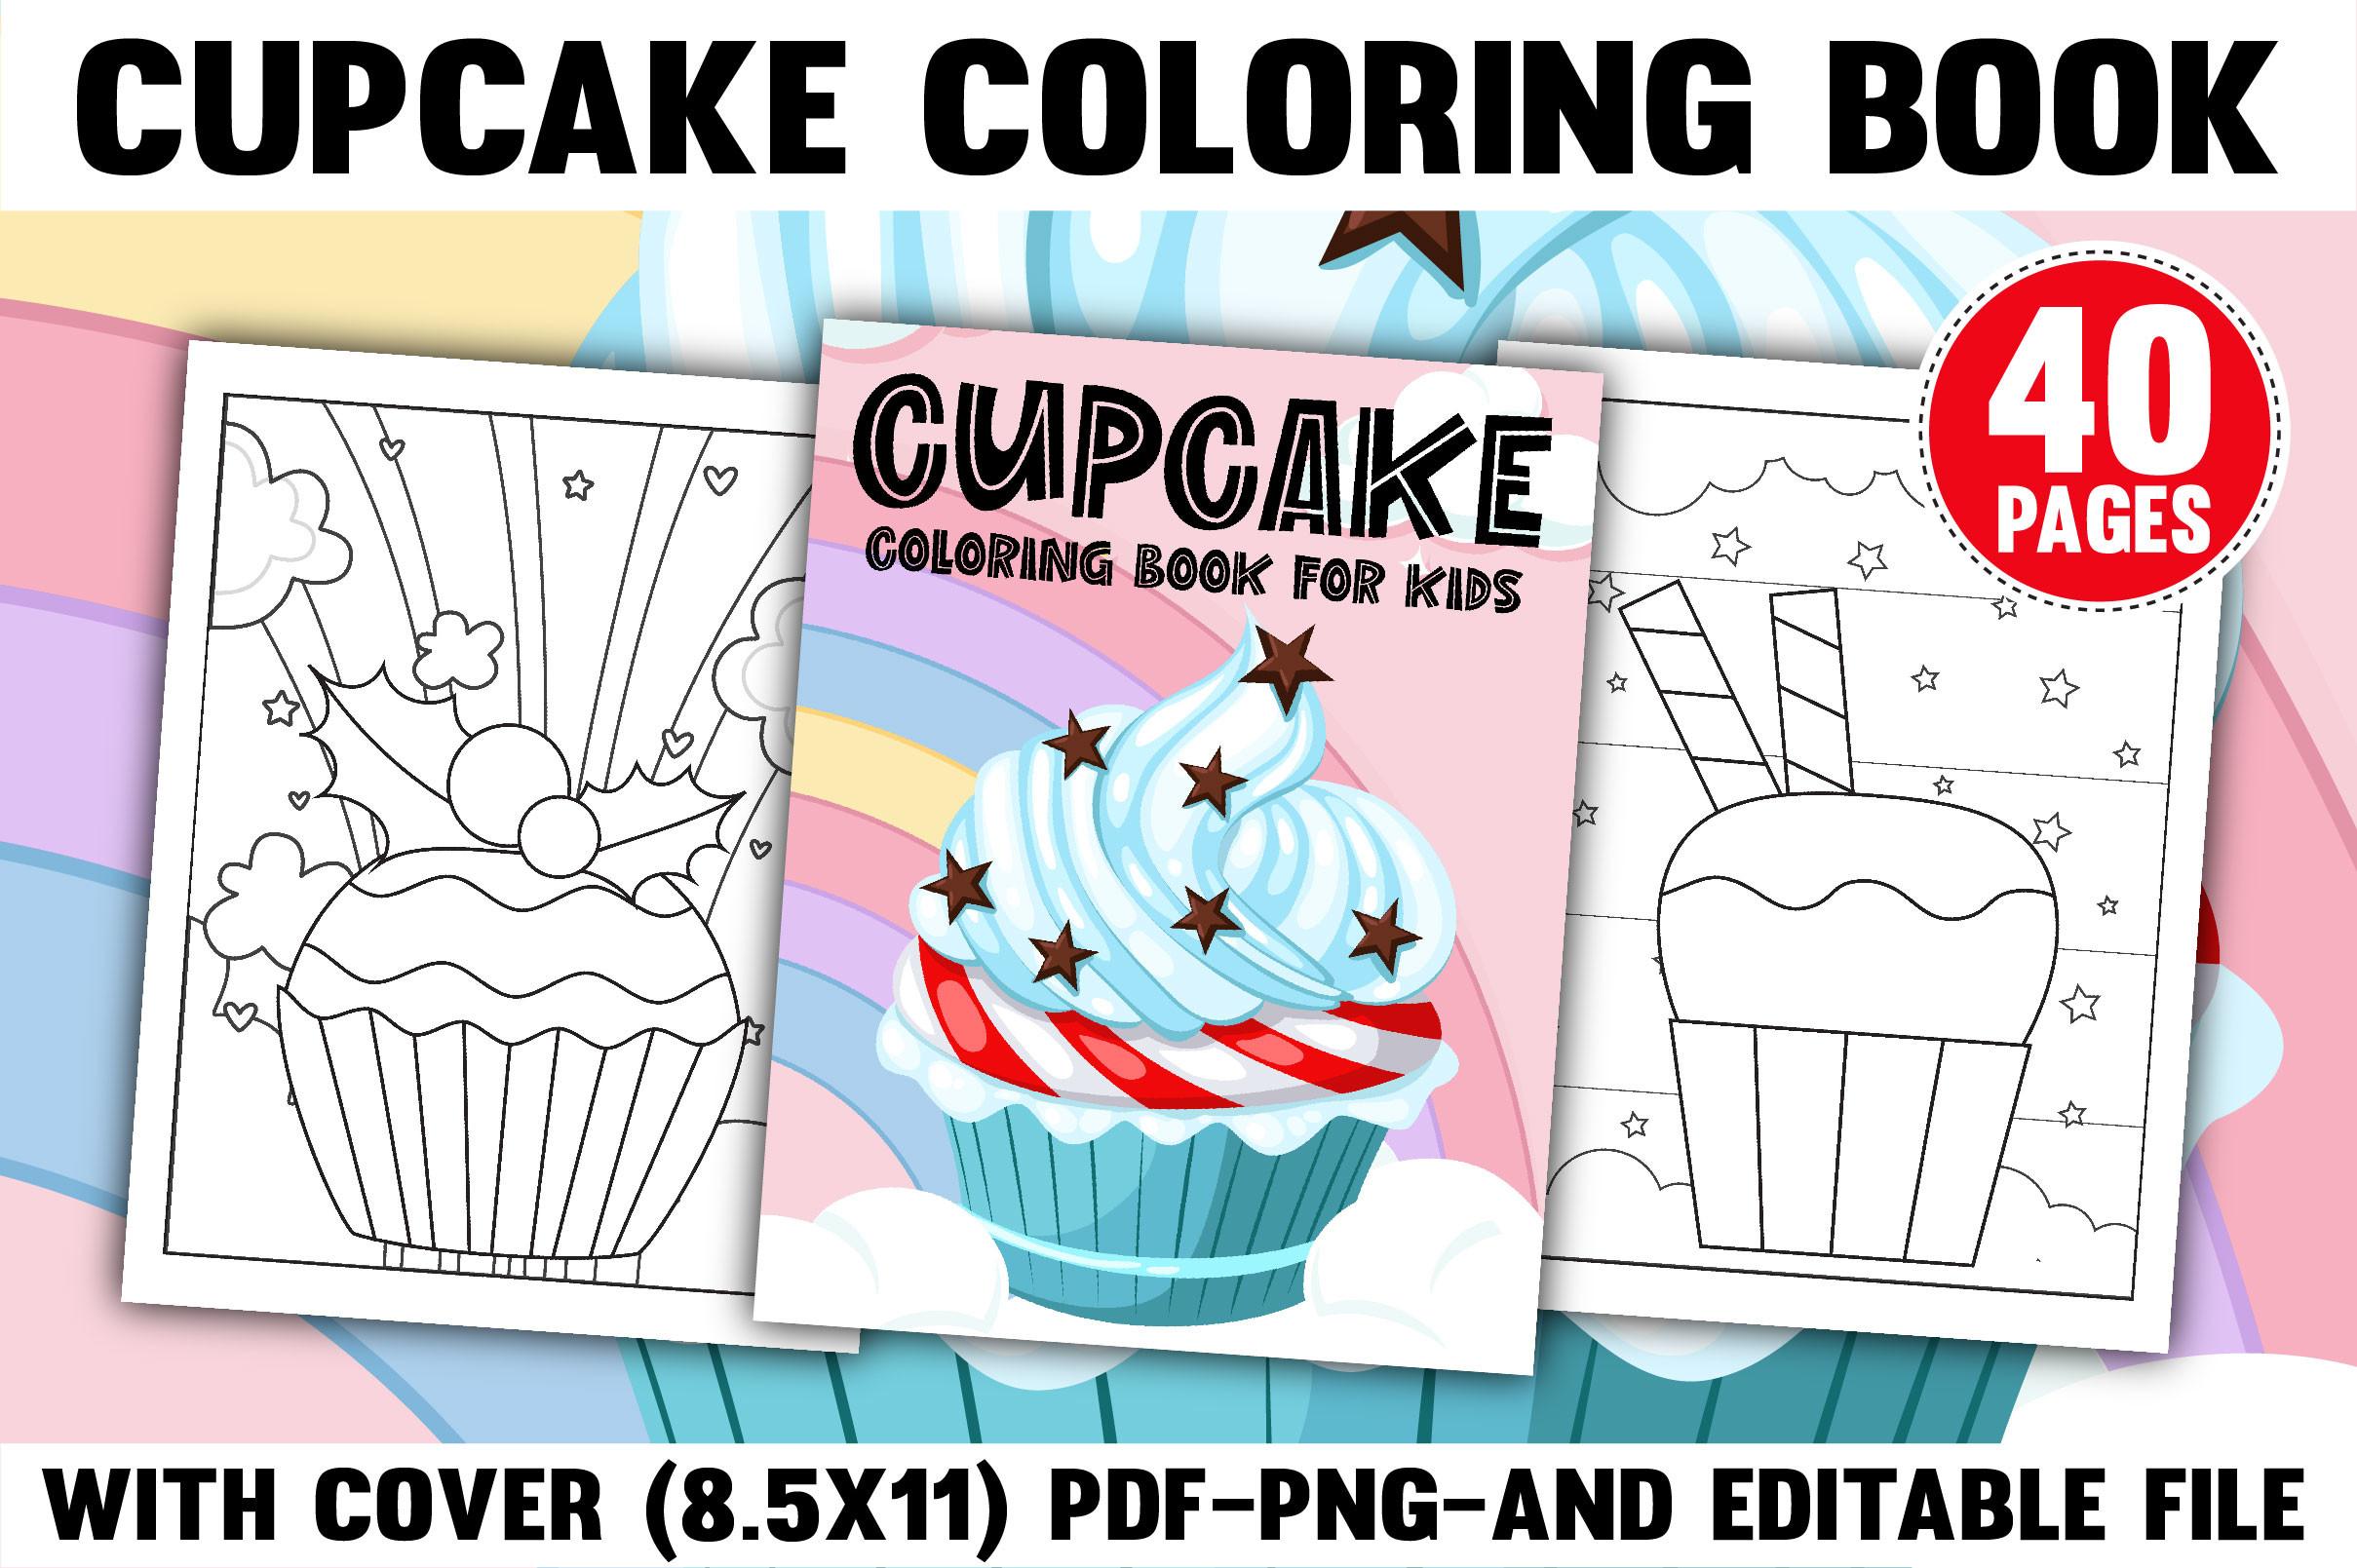 Cupcake Coloring Book with Cover Design